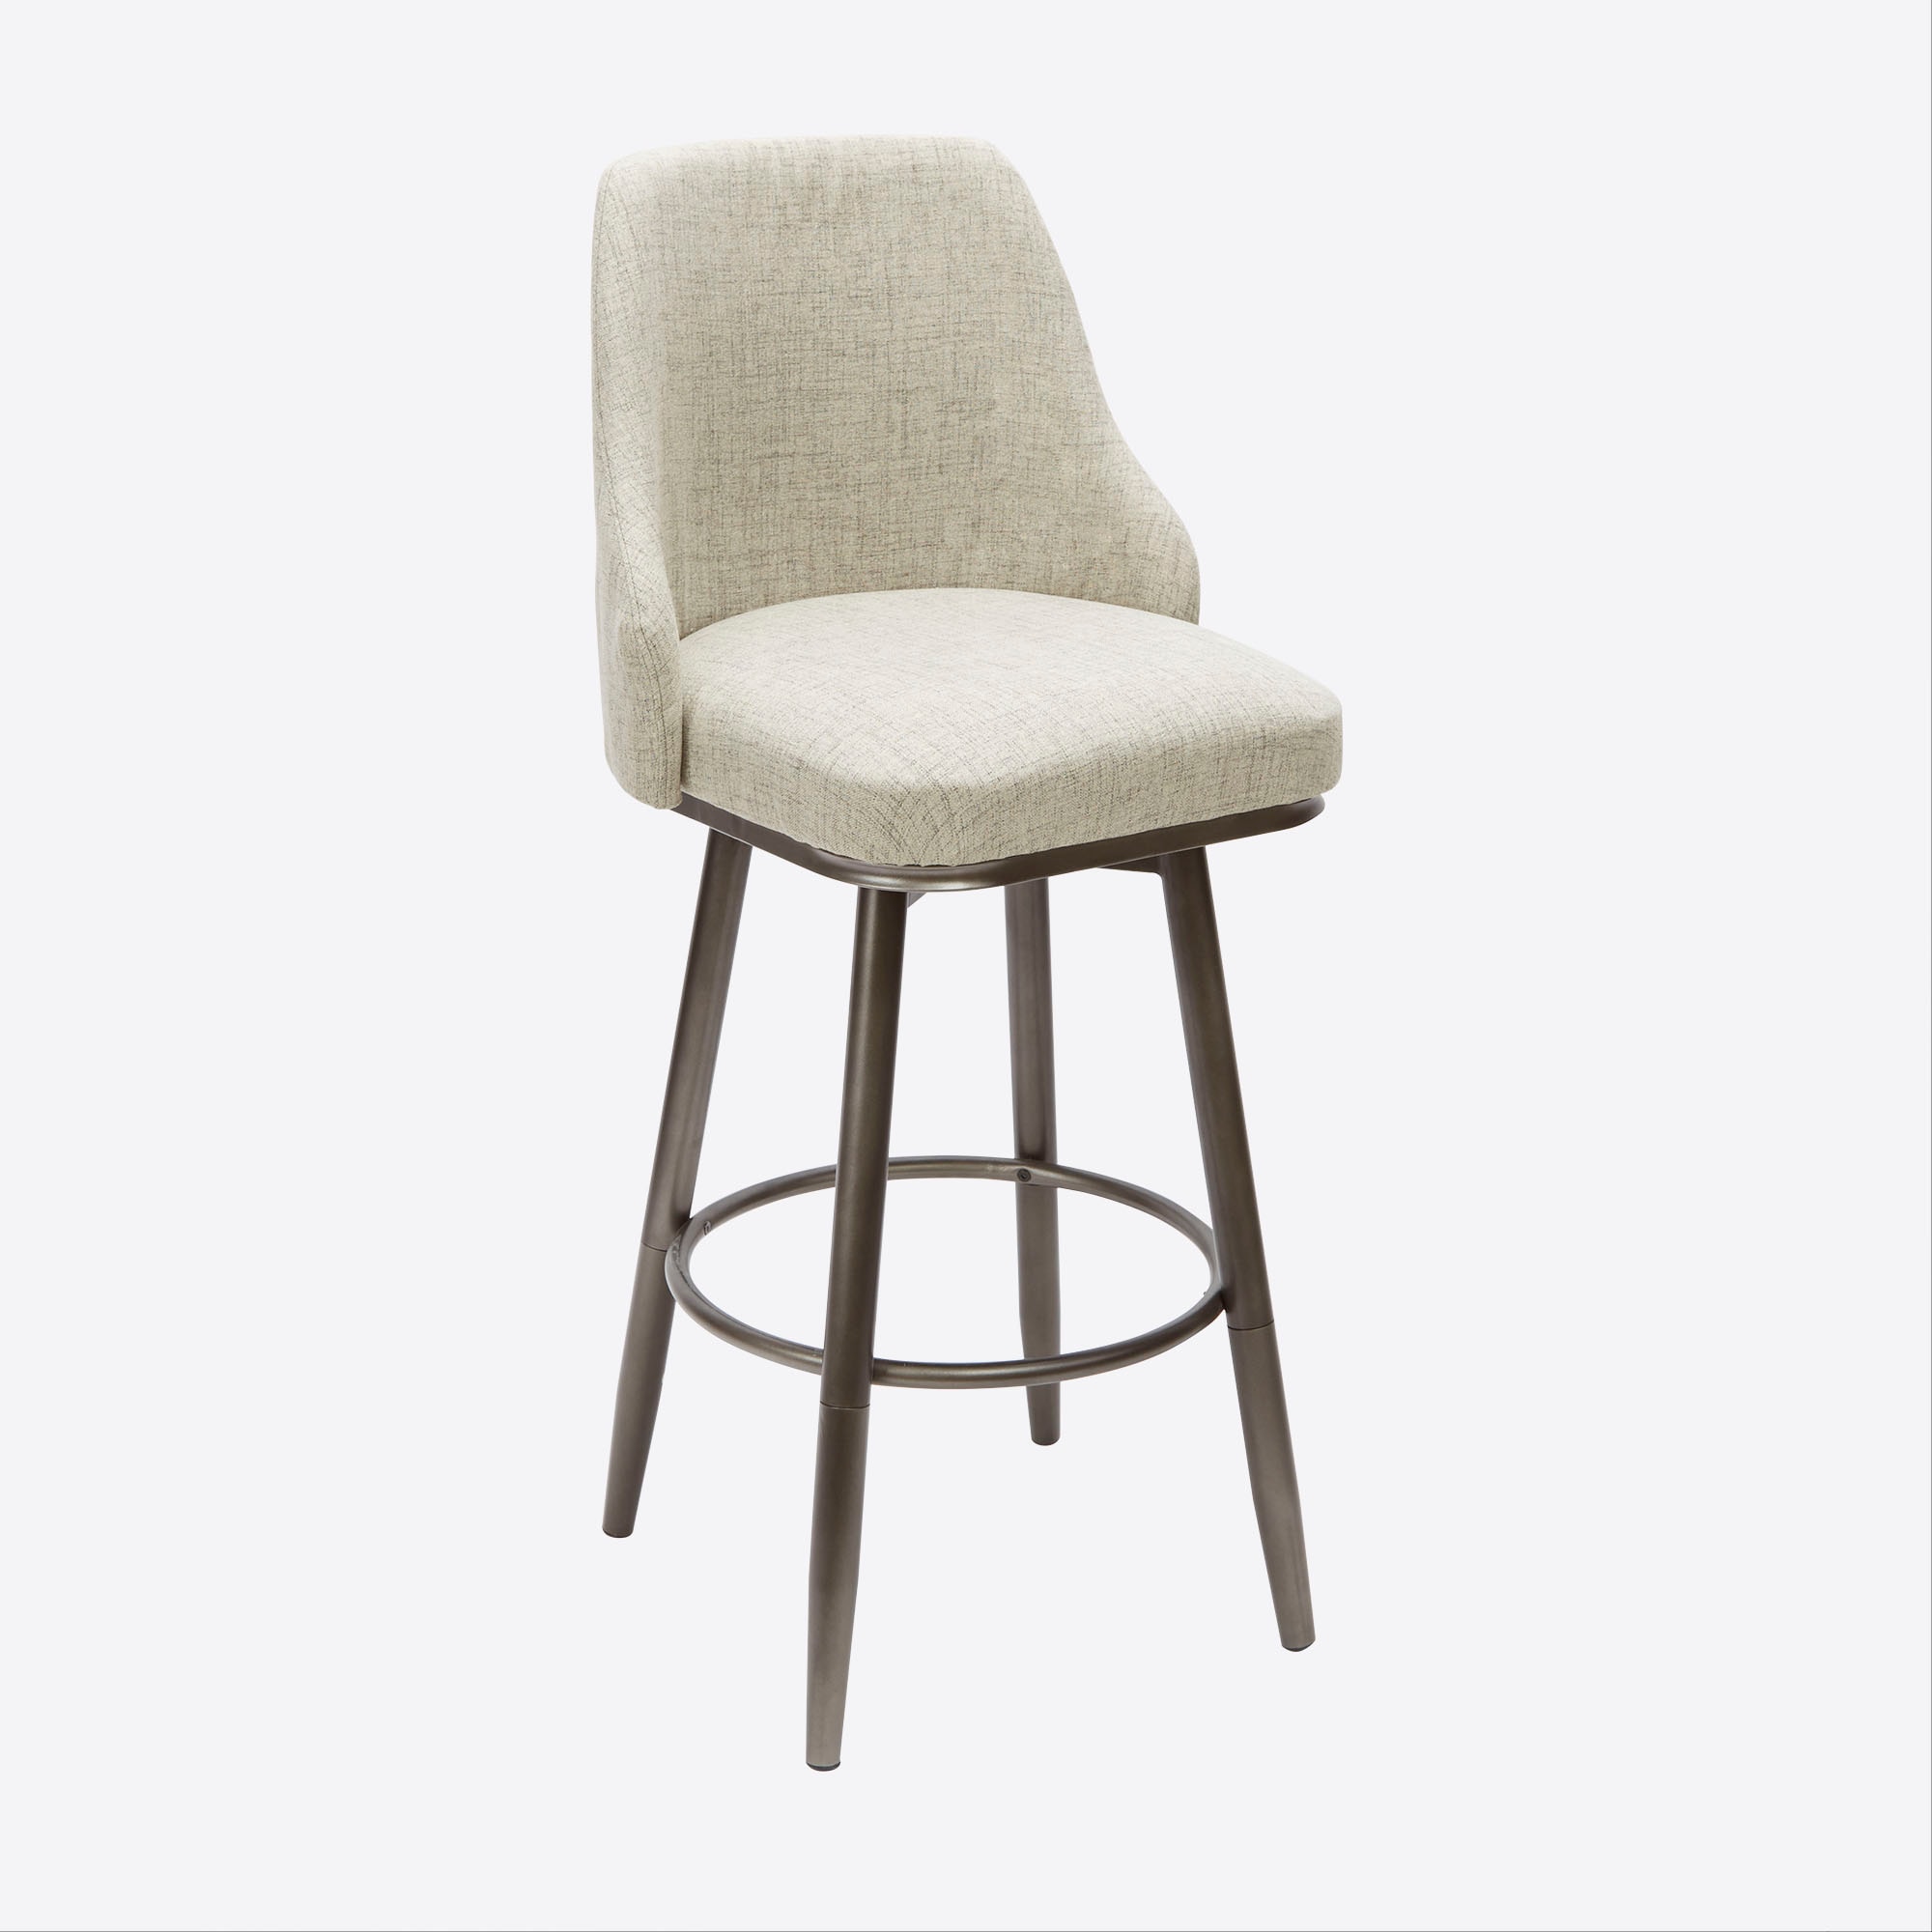 Metal Adjustable Height Upholstered, Upholstered Swivel Counter Stools With Arms